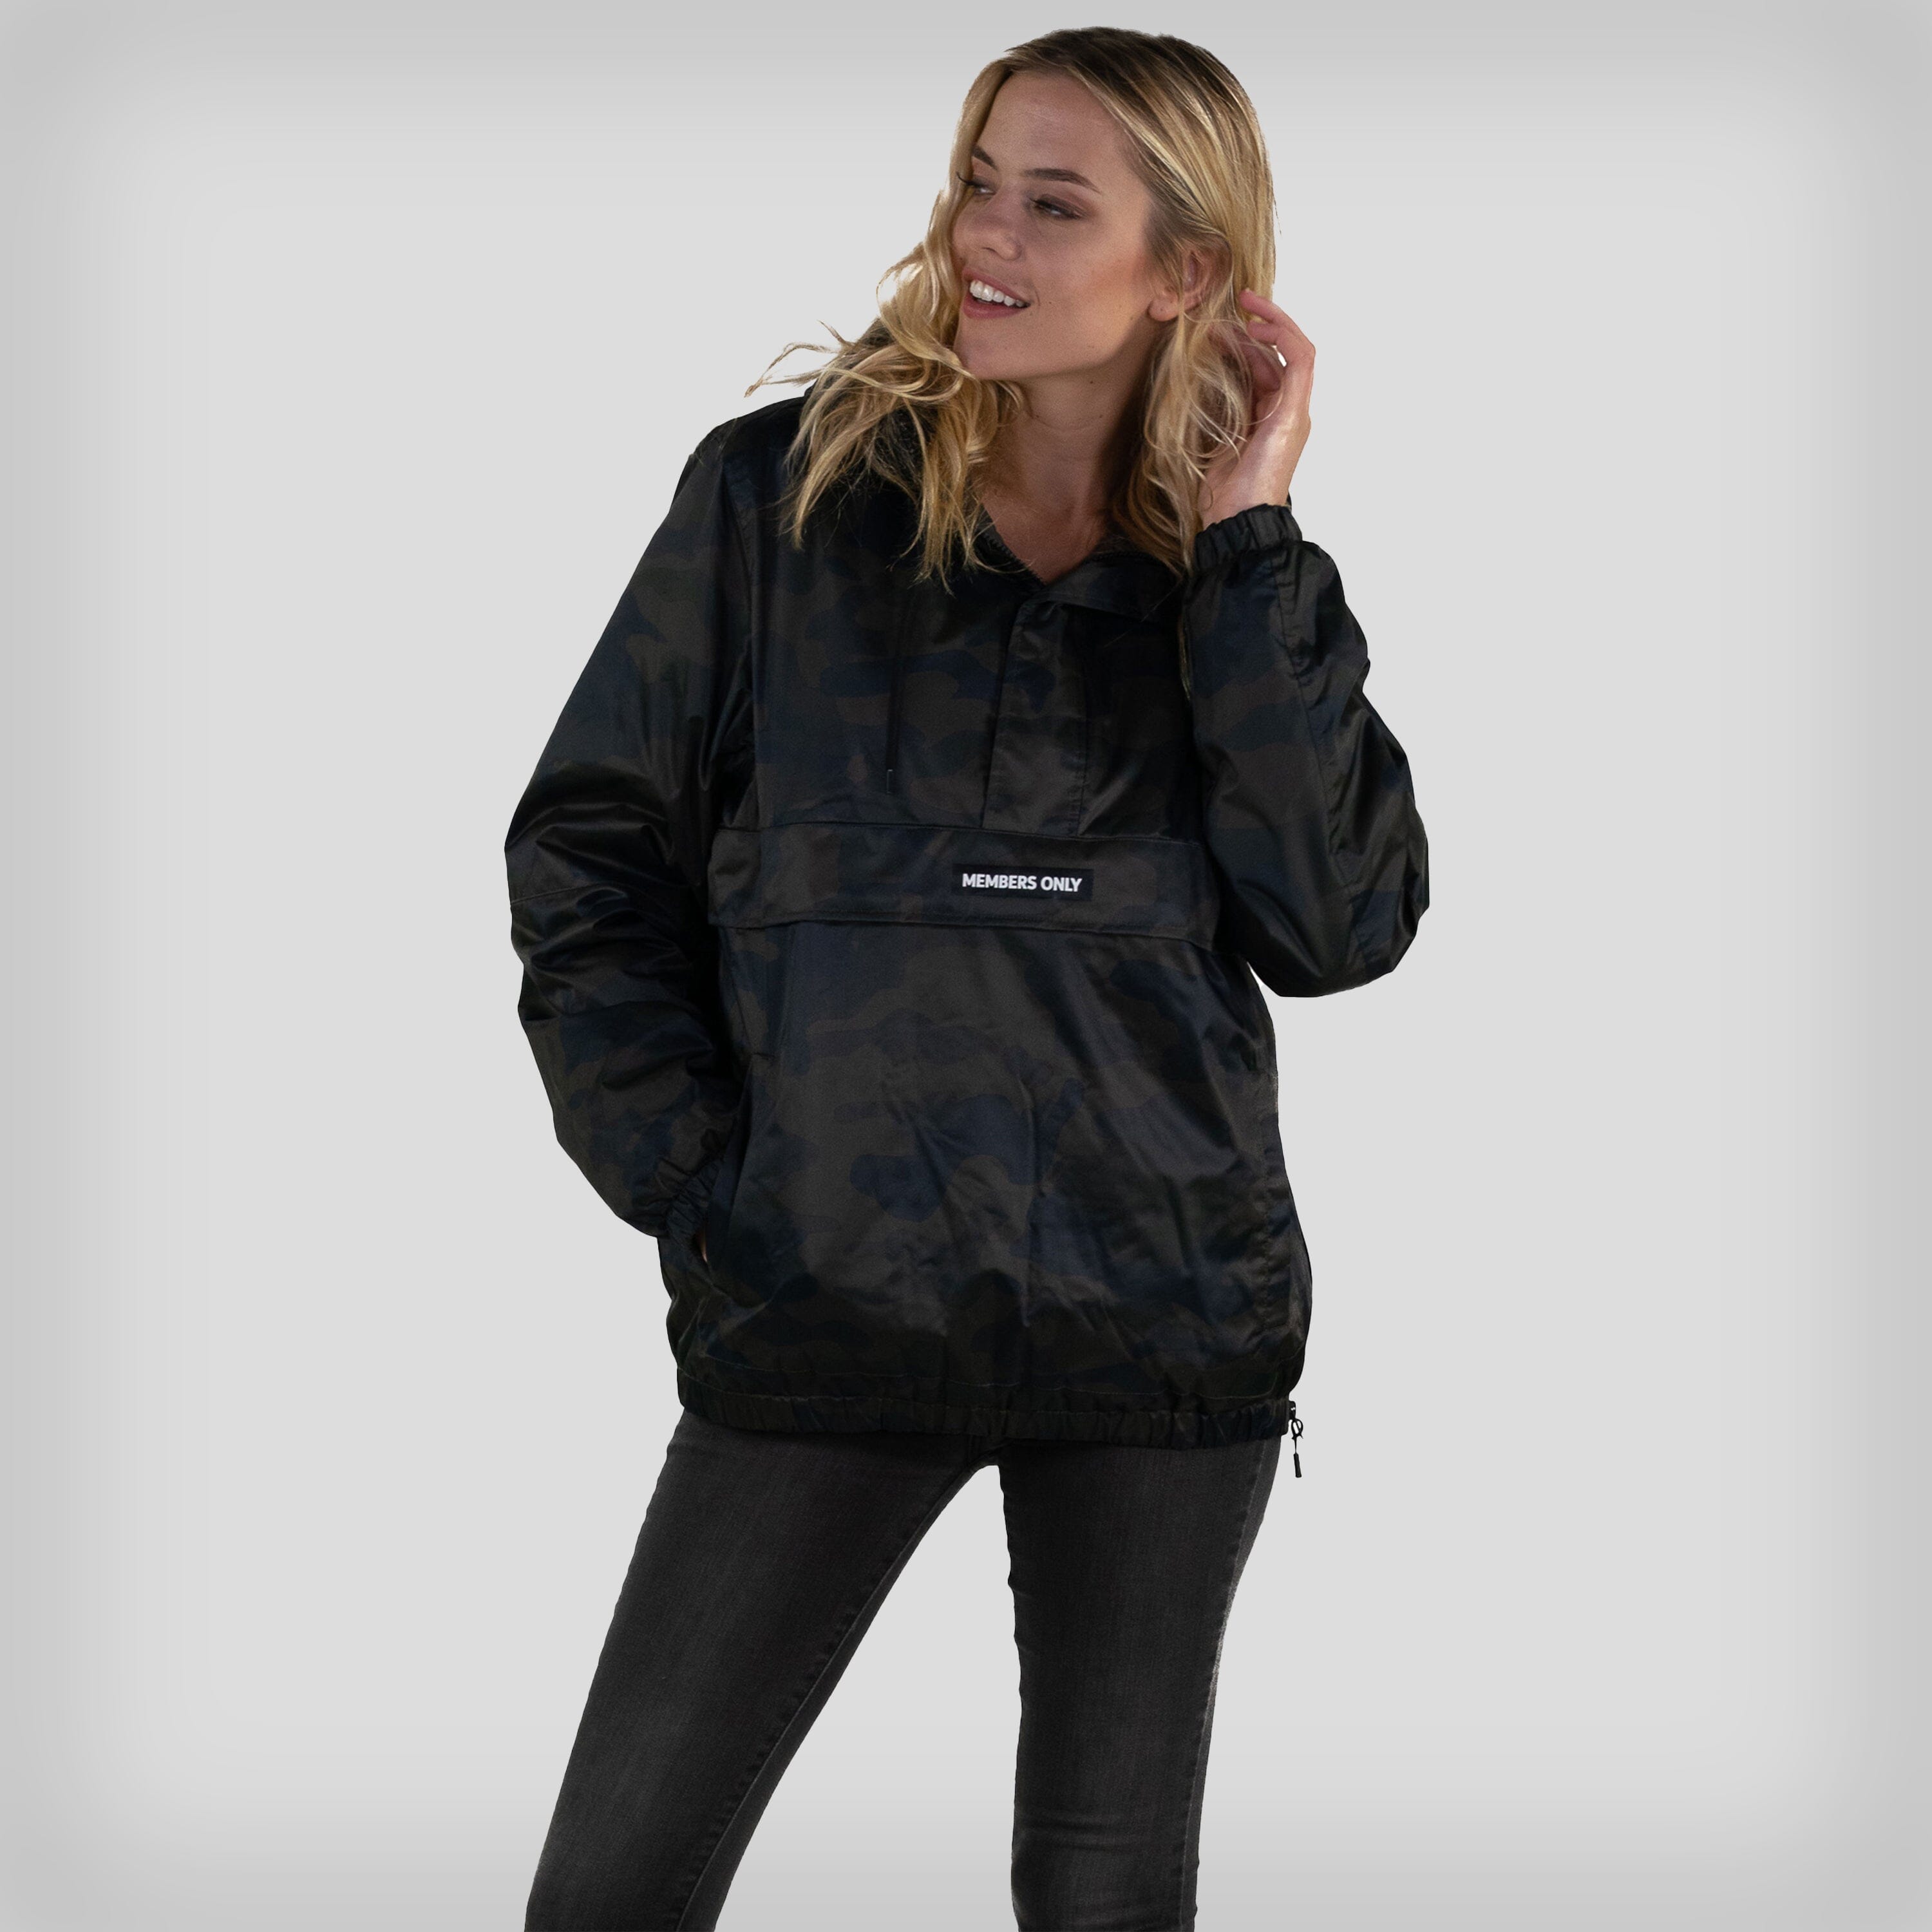 Women's Camo Popover Oversized Jacket - FINAL SALE Womens Jacket Members Only CAMOUFLAGE Small 